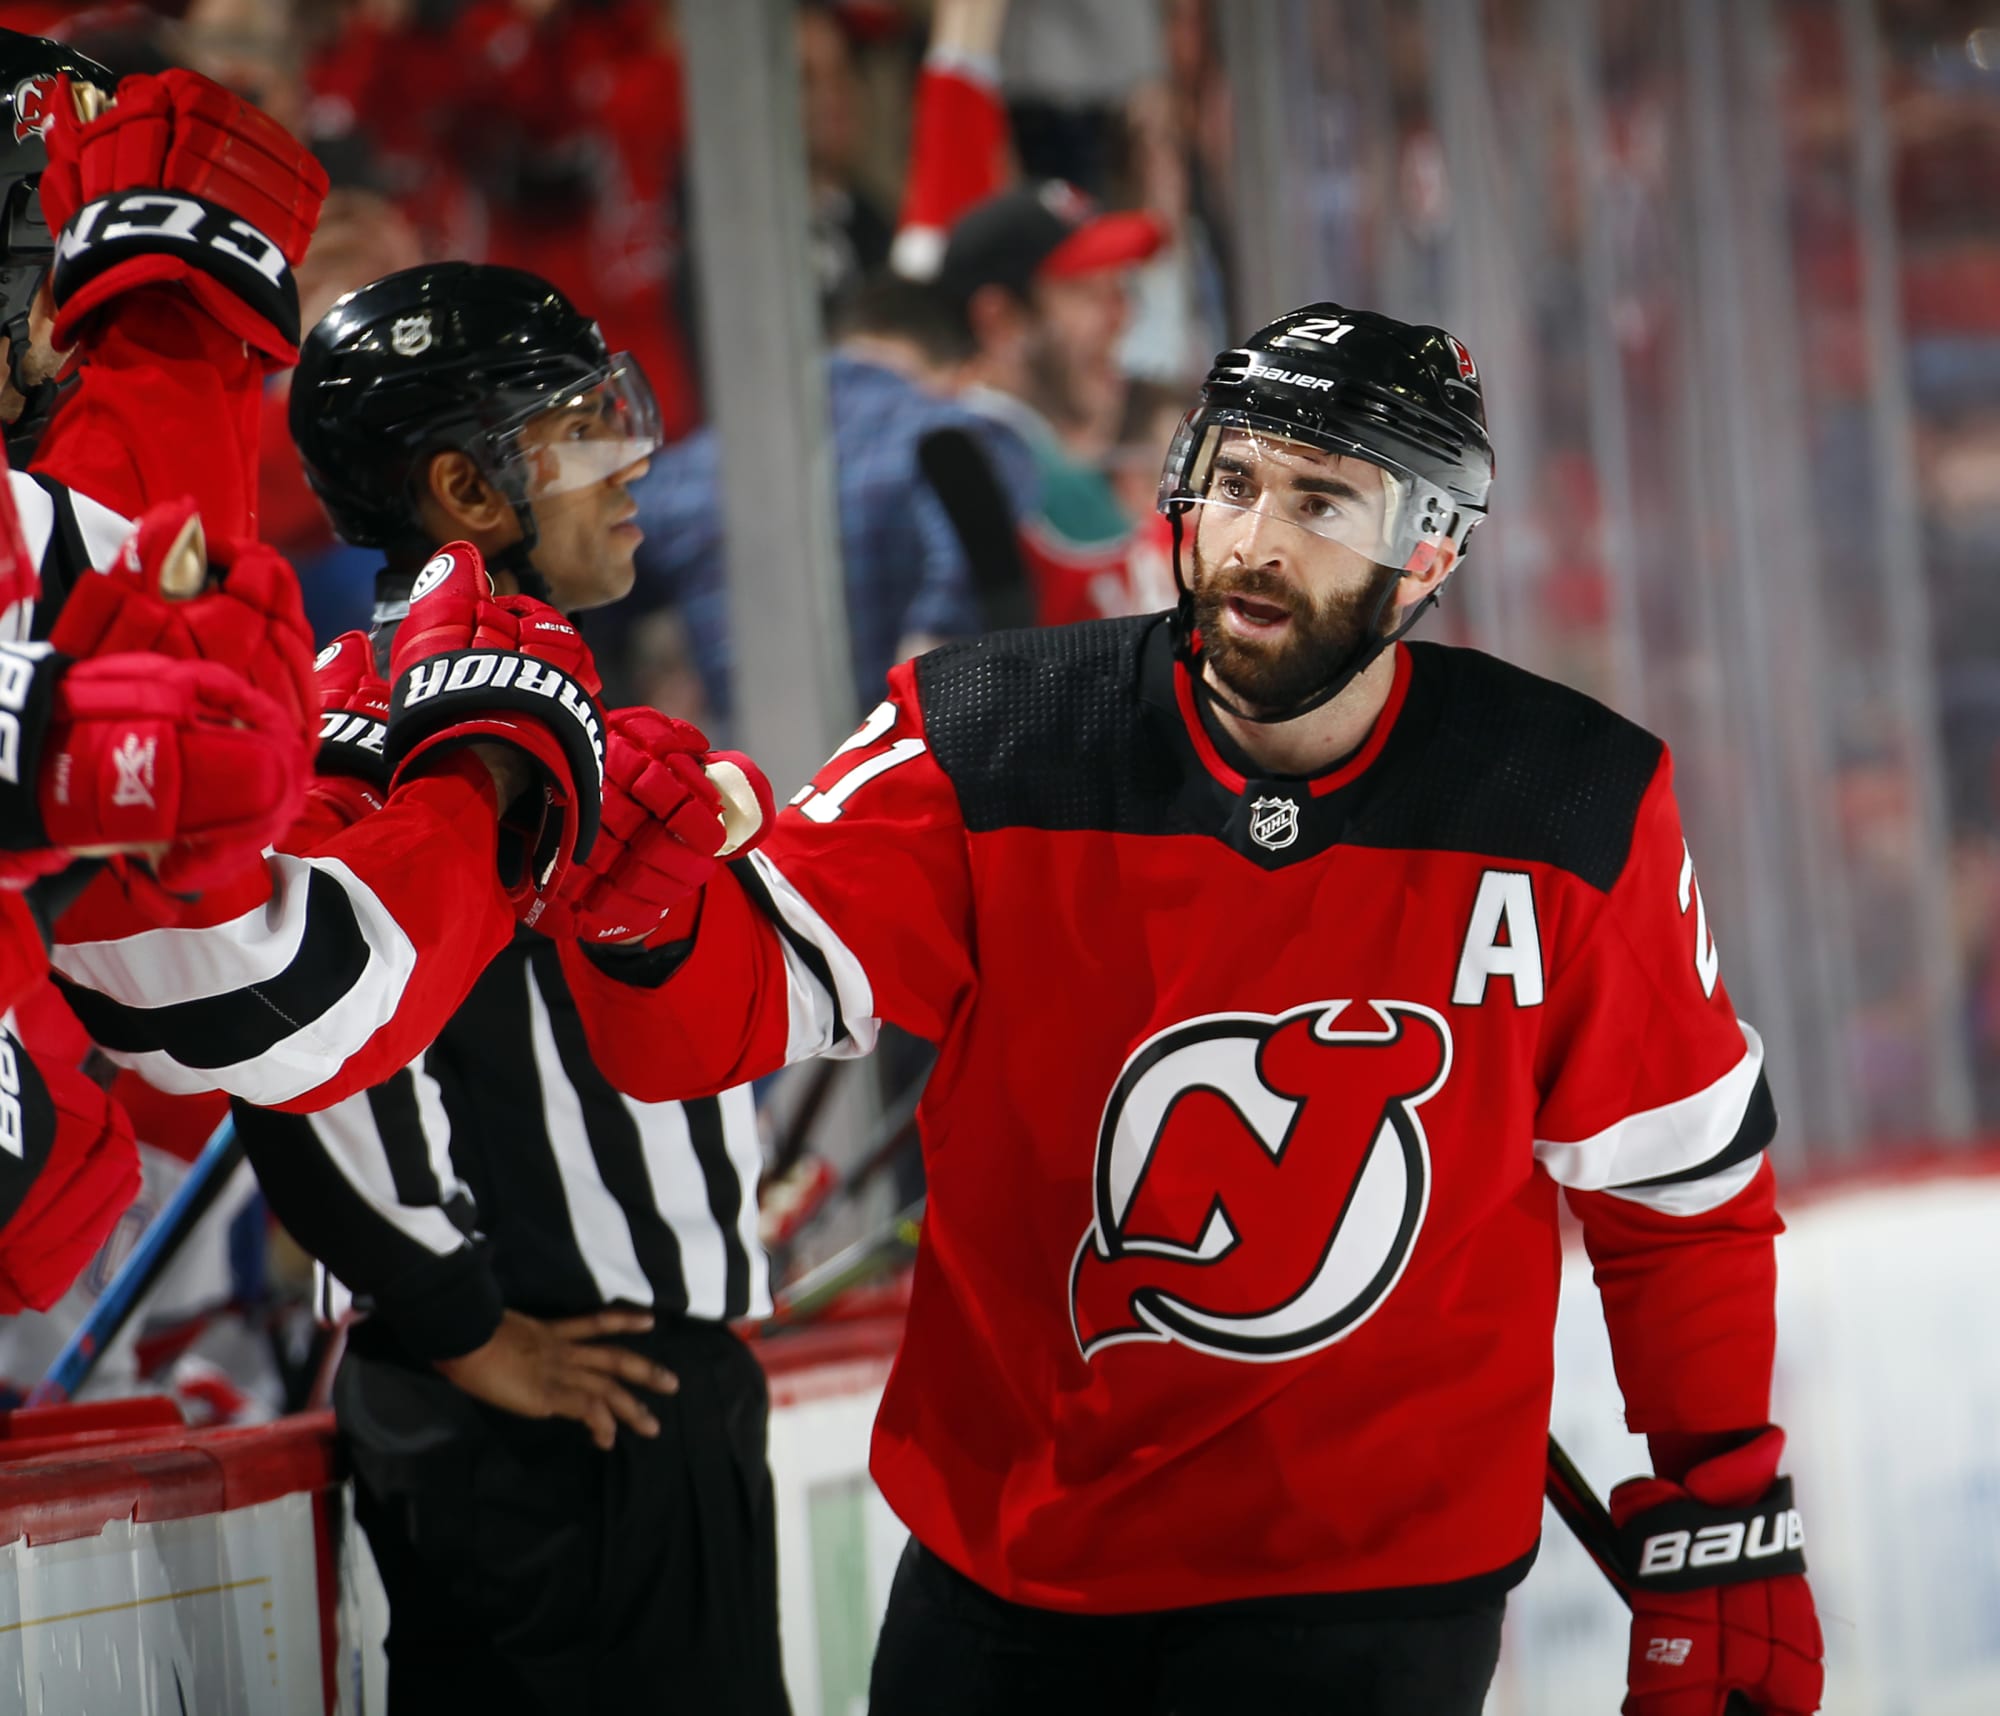 Toronto Maple Leafs at New Jersey Devils - Game #21 Preview